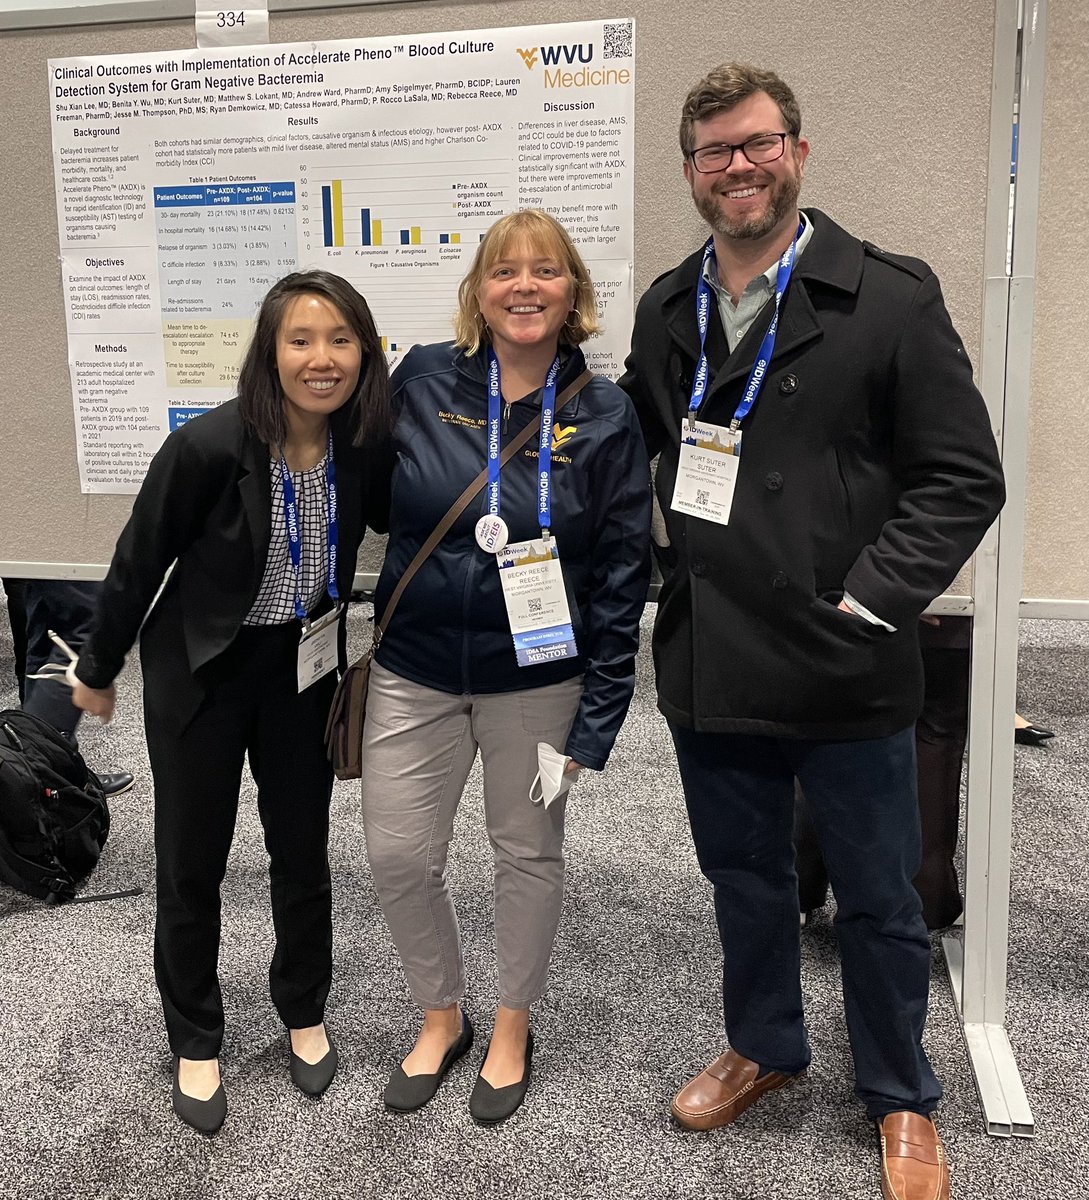 We’re proud of our fellow @kurt_j_suter and resident @Benita84897502 presenting their work at @IDWeek2022